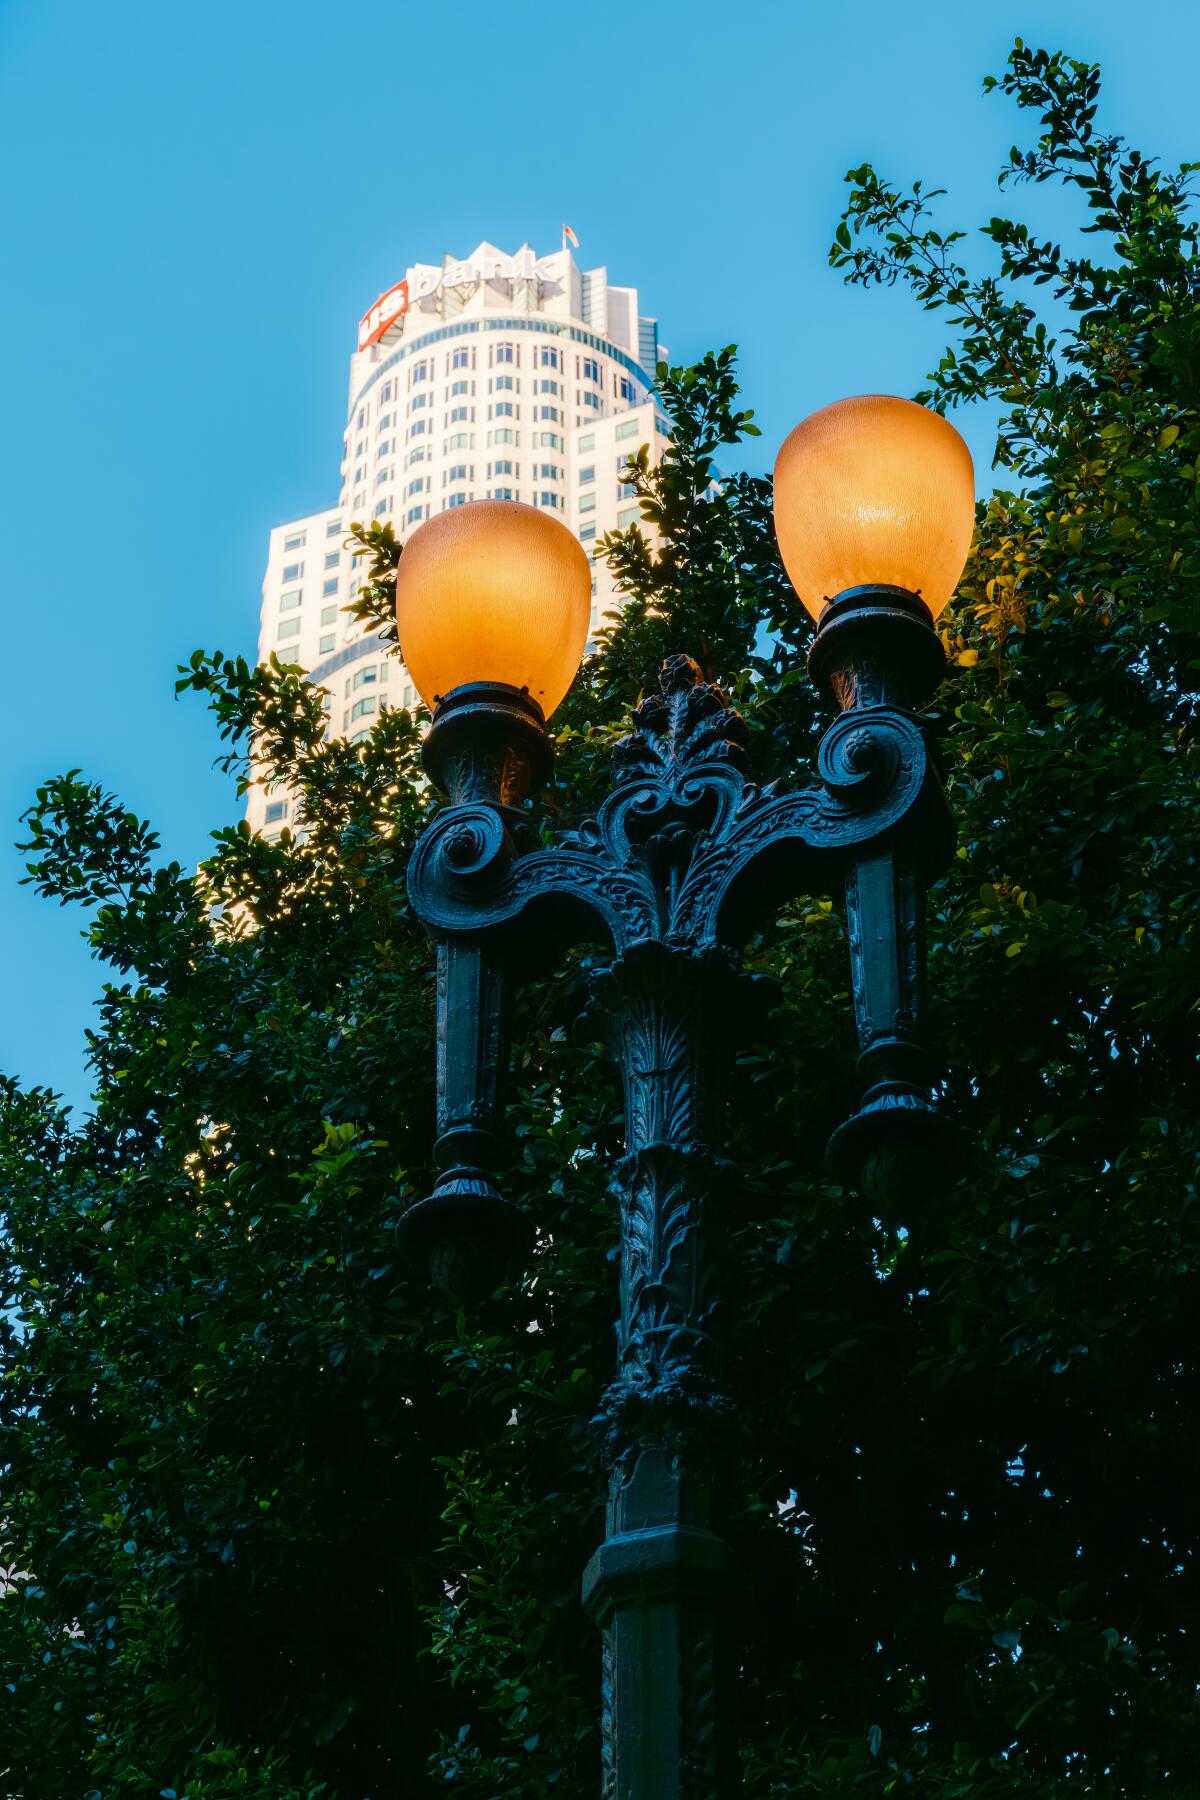 A Broadway Rose streetlight set against the iconic U.S. Bank Tower.